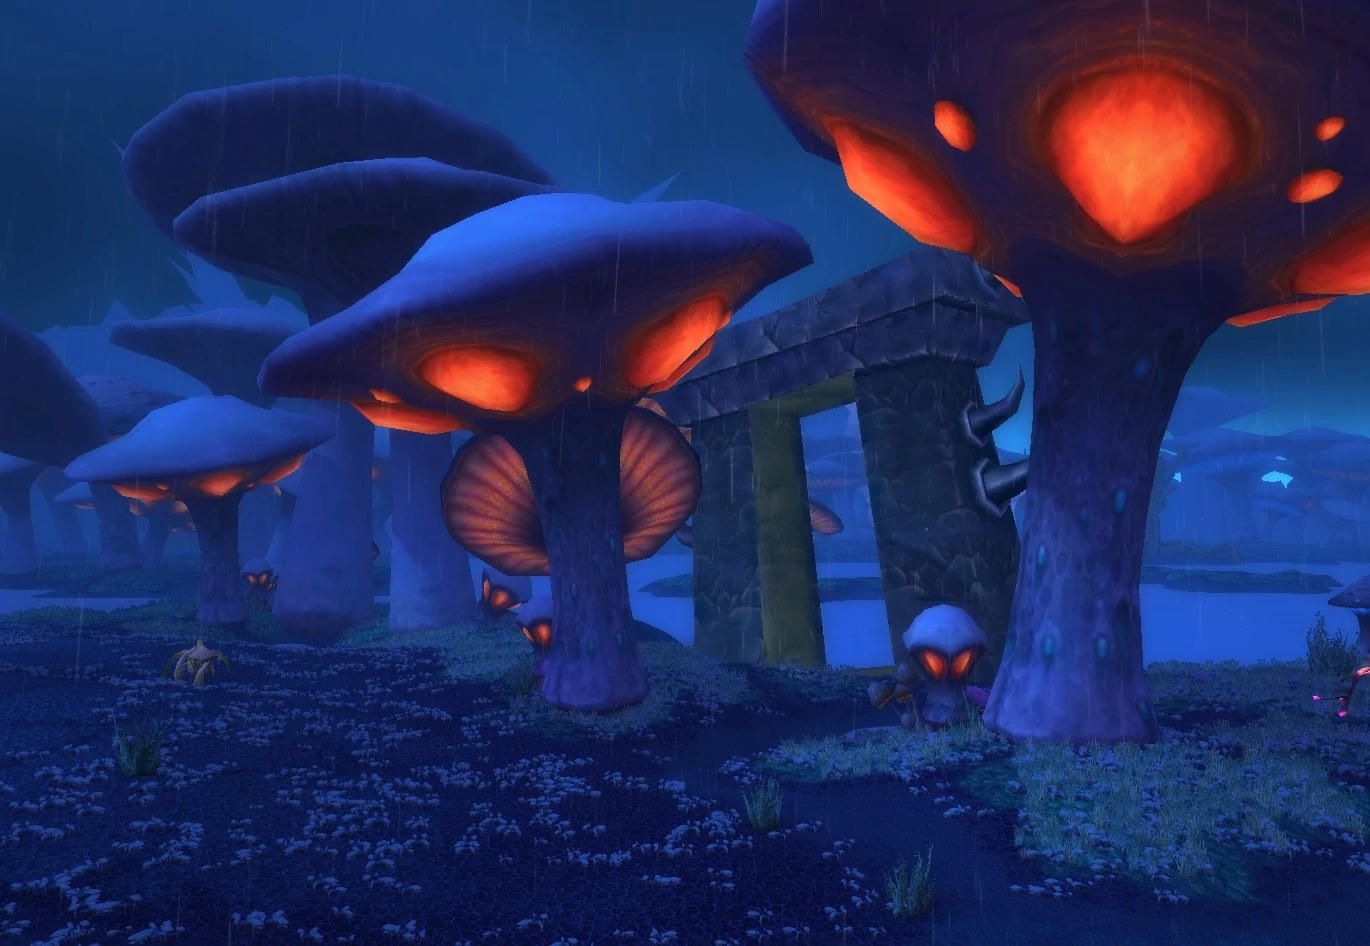 Welcome to the Mushroom Kingdom. No, not that one!